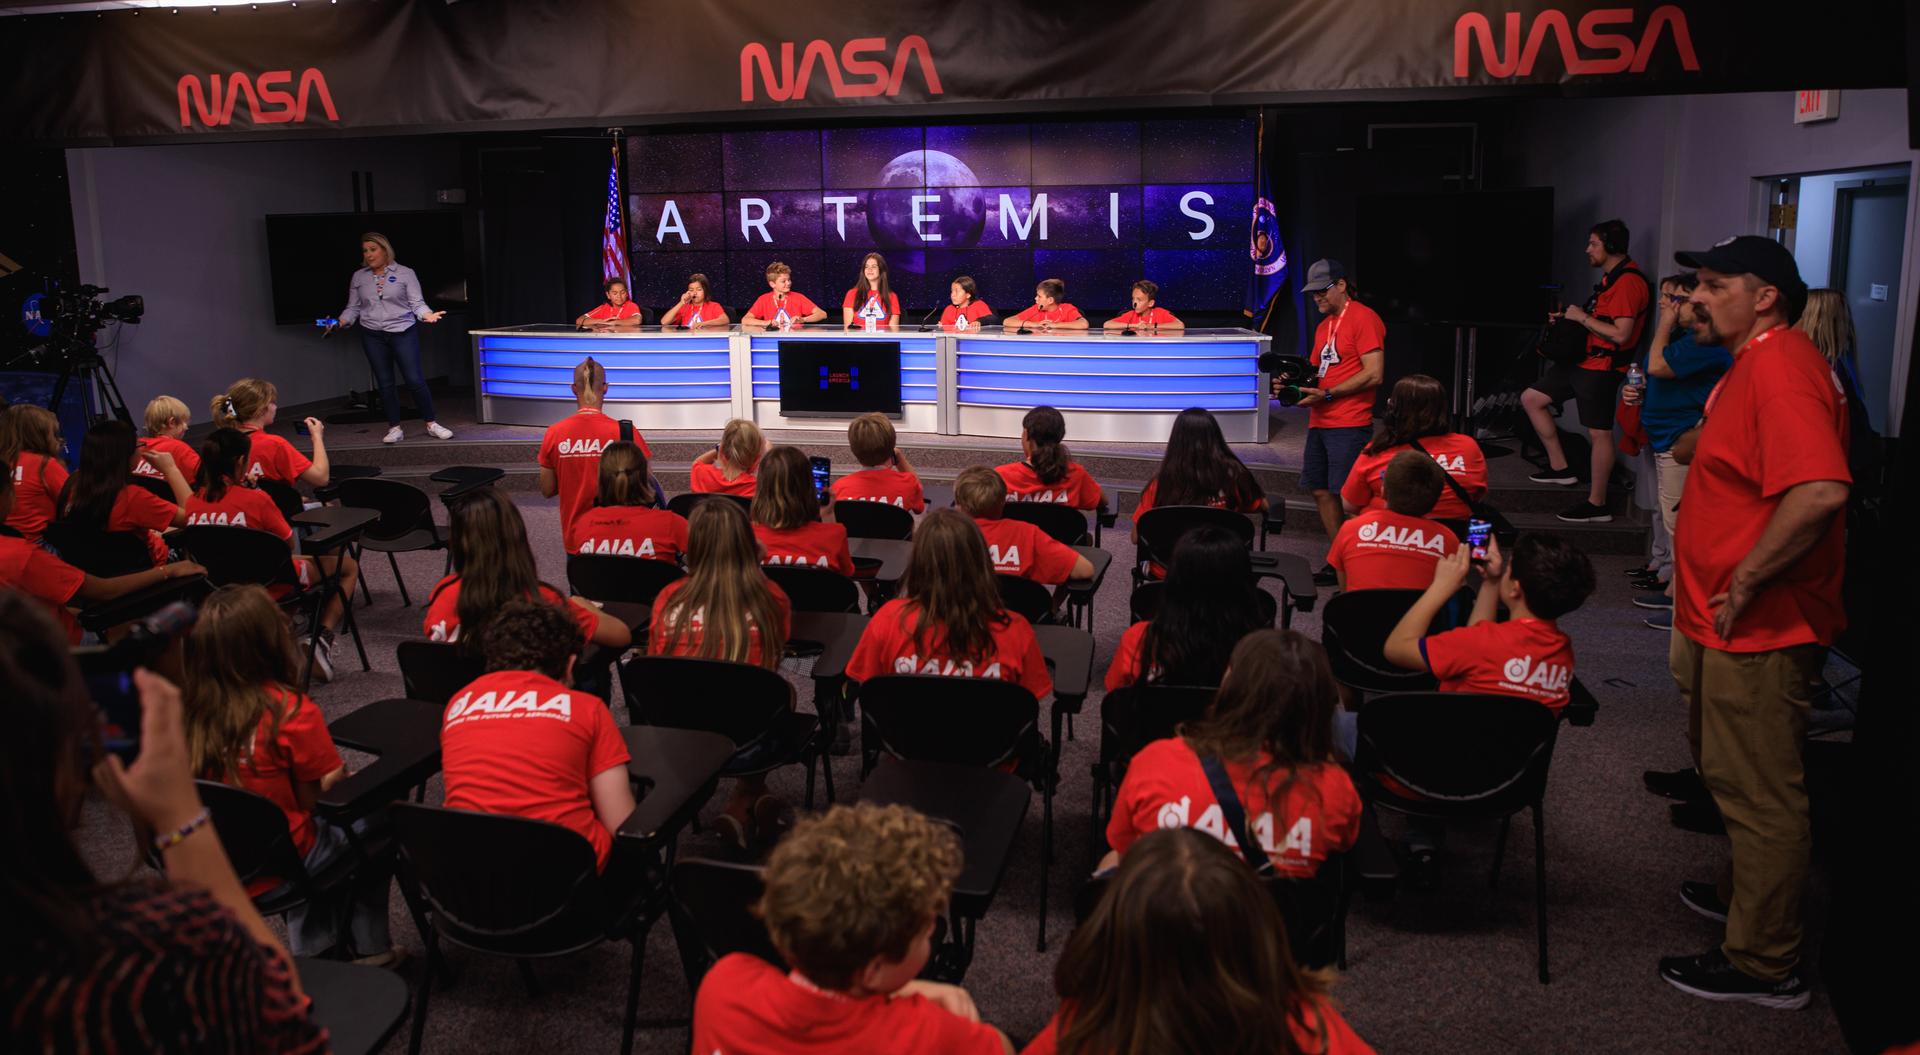 A group of students and their chaperones gather in the John Holliman Auditorium of the News Center to simulate a news conference during a tour of NASA’s Kennedy Space Center in Florida on Oct. 6, 2022.